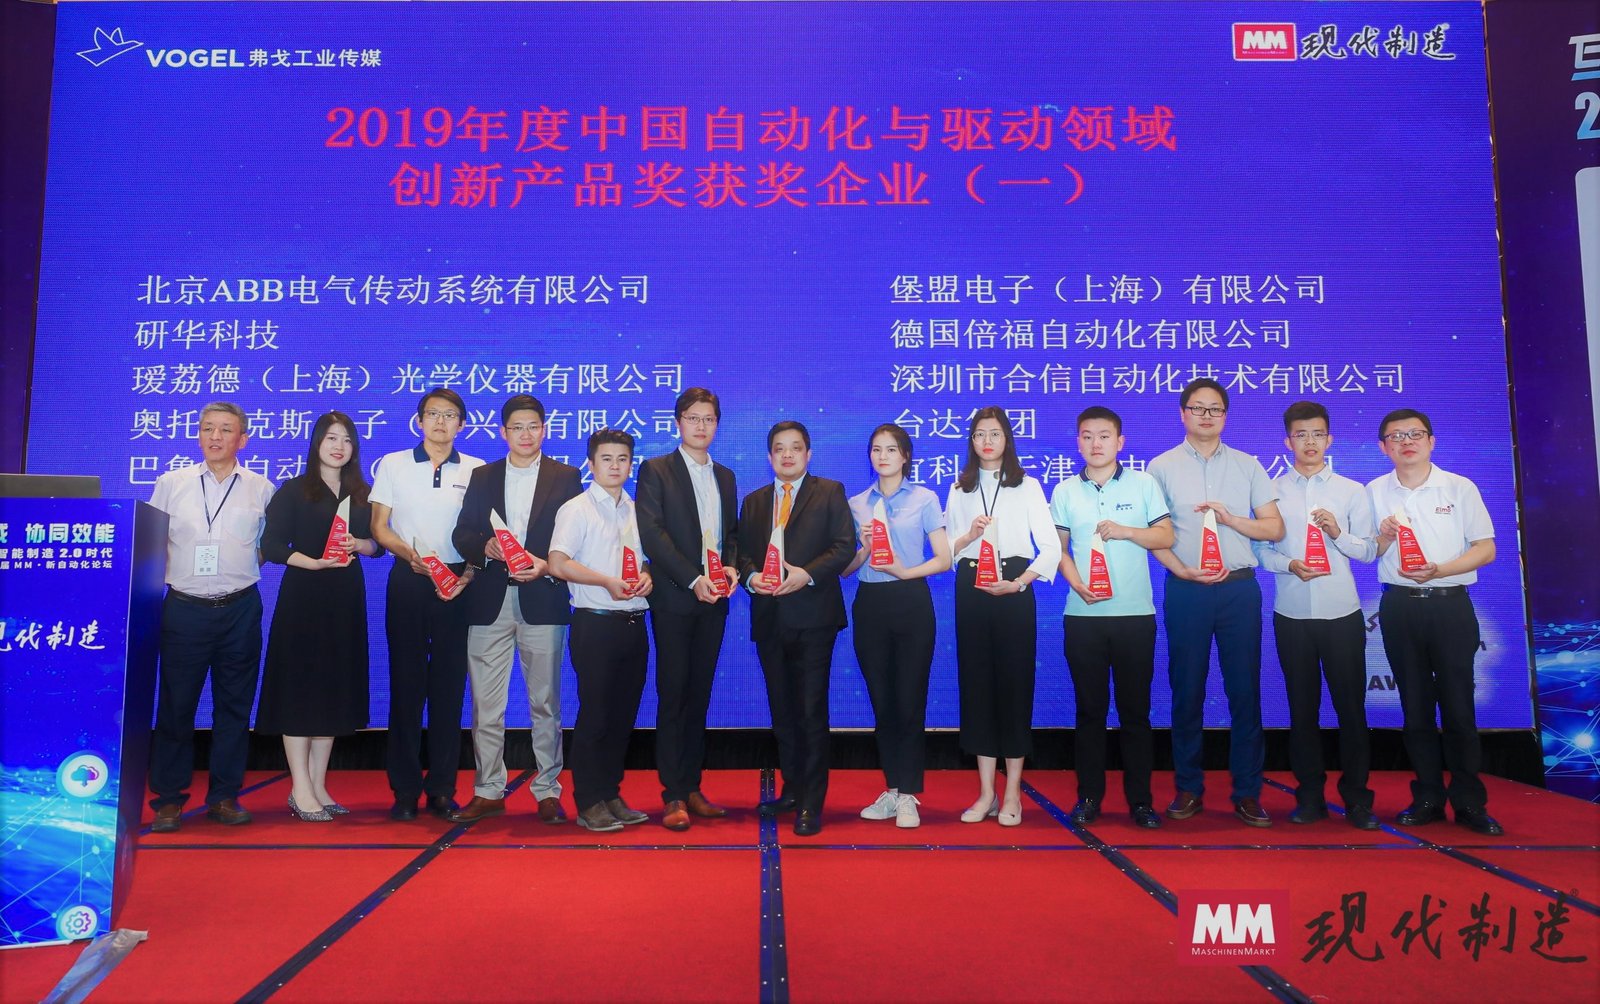  Liming Zhang represented Allied Vision at the award ceremony in Shanghai (fourth from left)